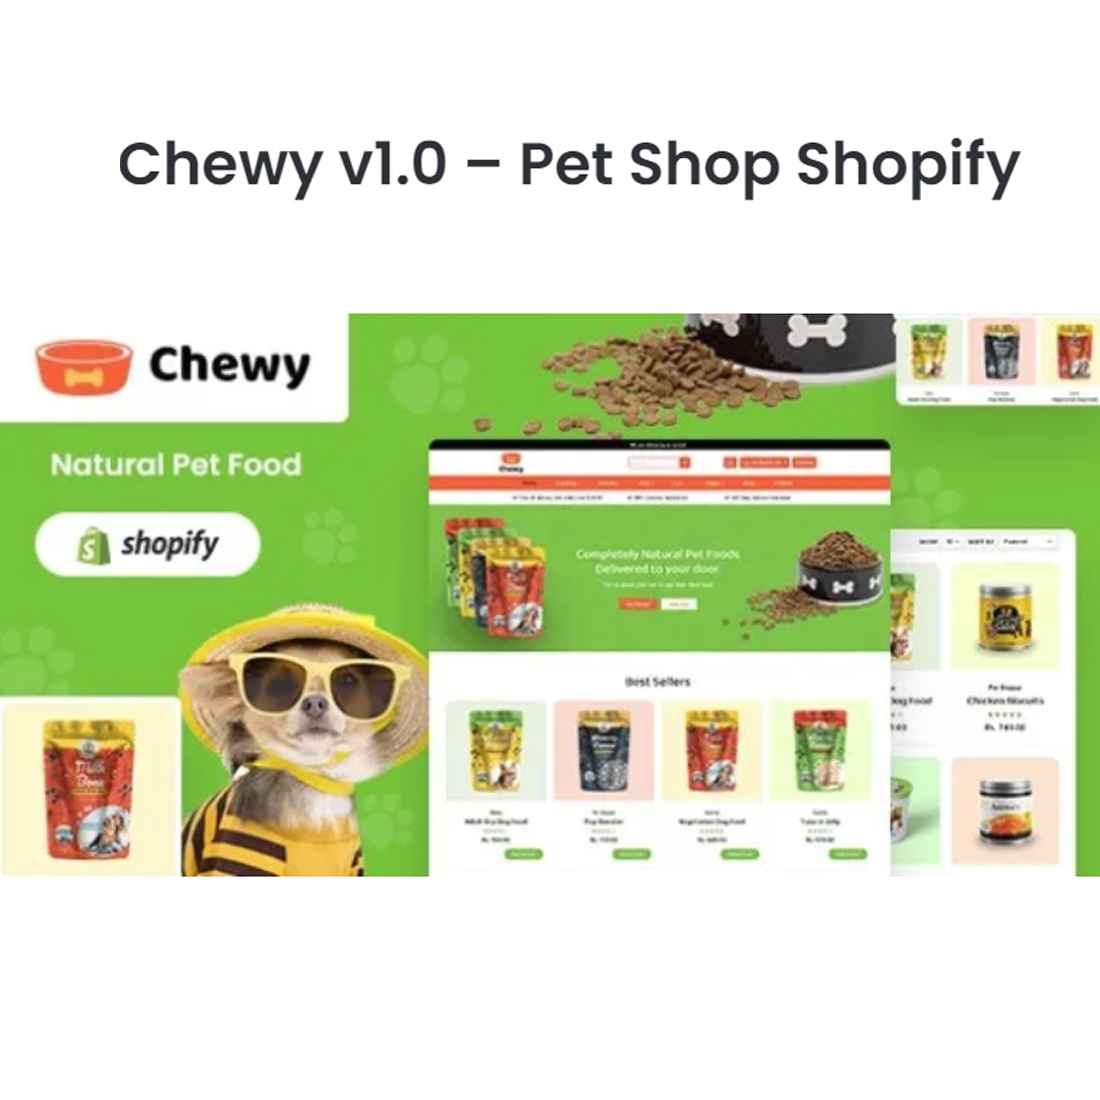 Pet Shop Shopify 20 - Chewy v10 preview image.